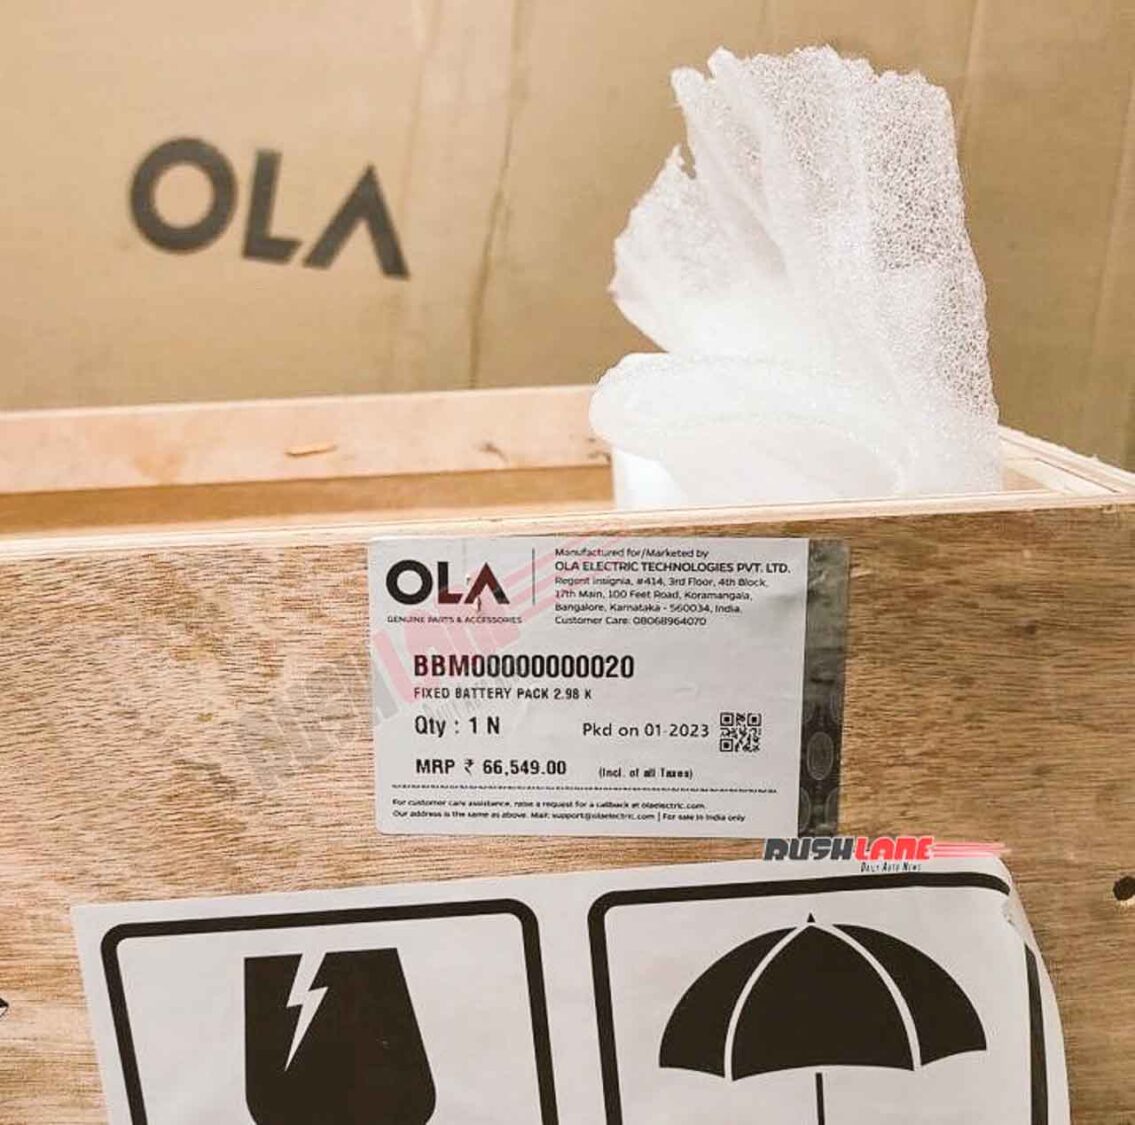 Ola Electric Scooter Battery Cost - 2.98 kW at Rs 66k